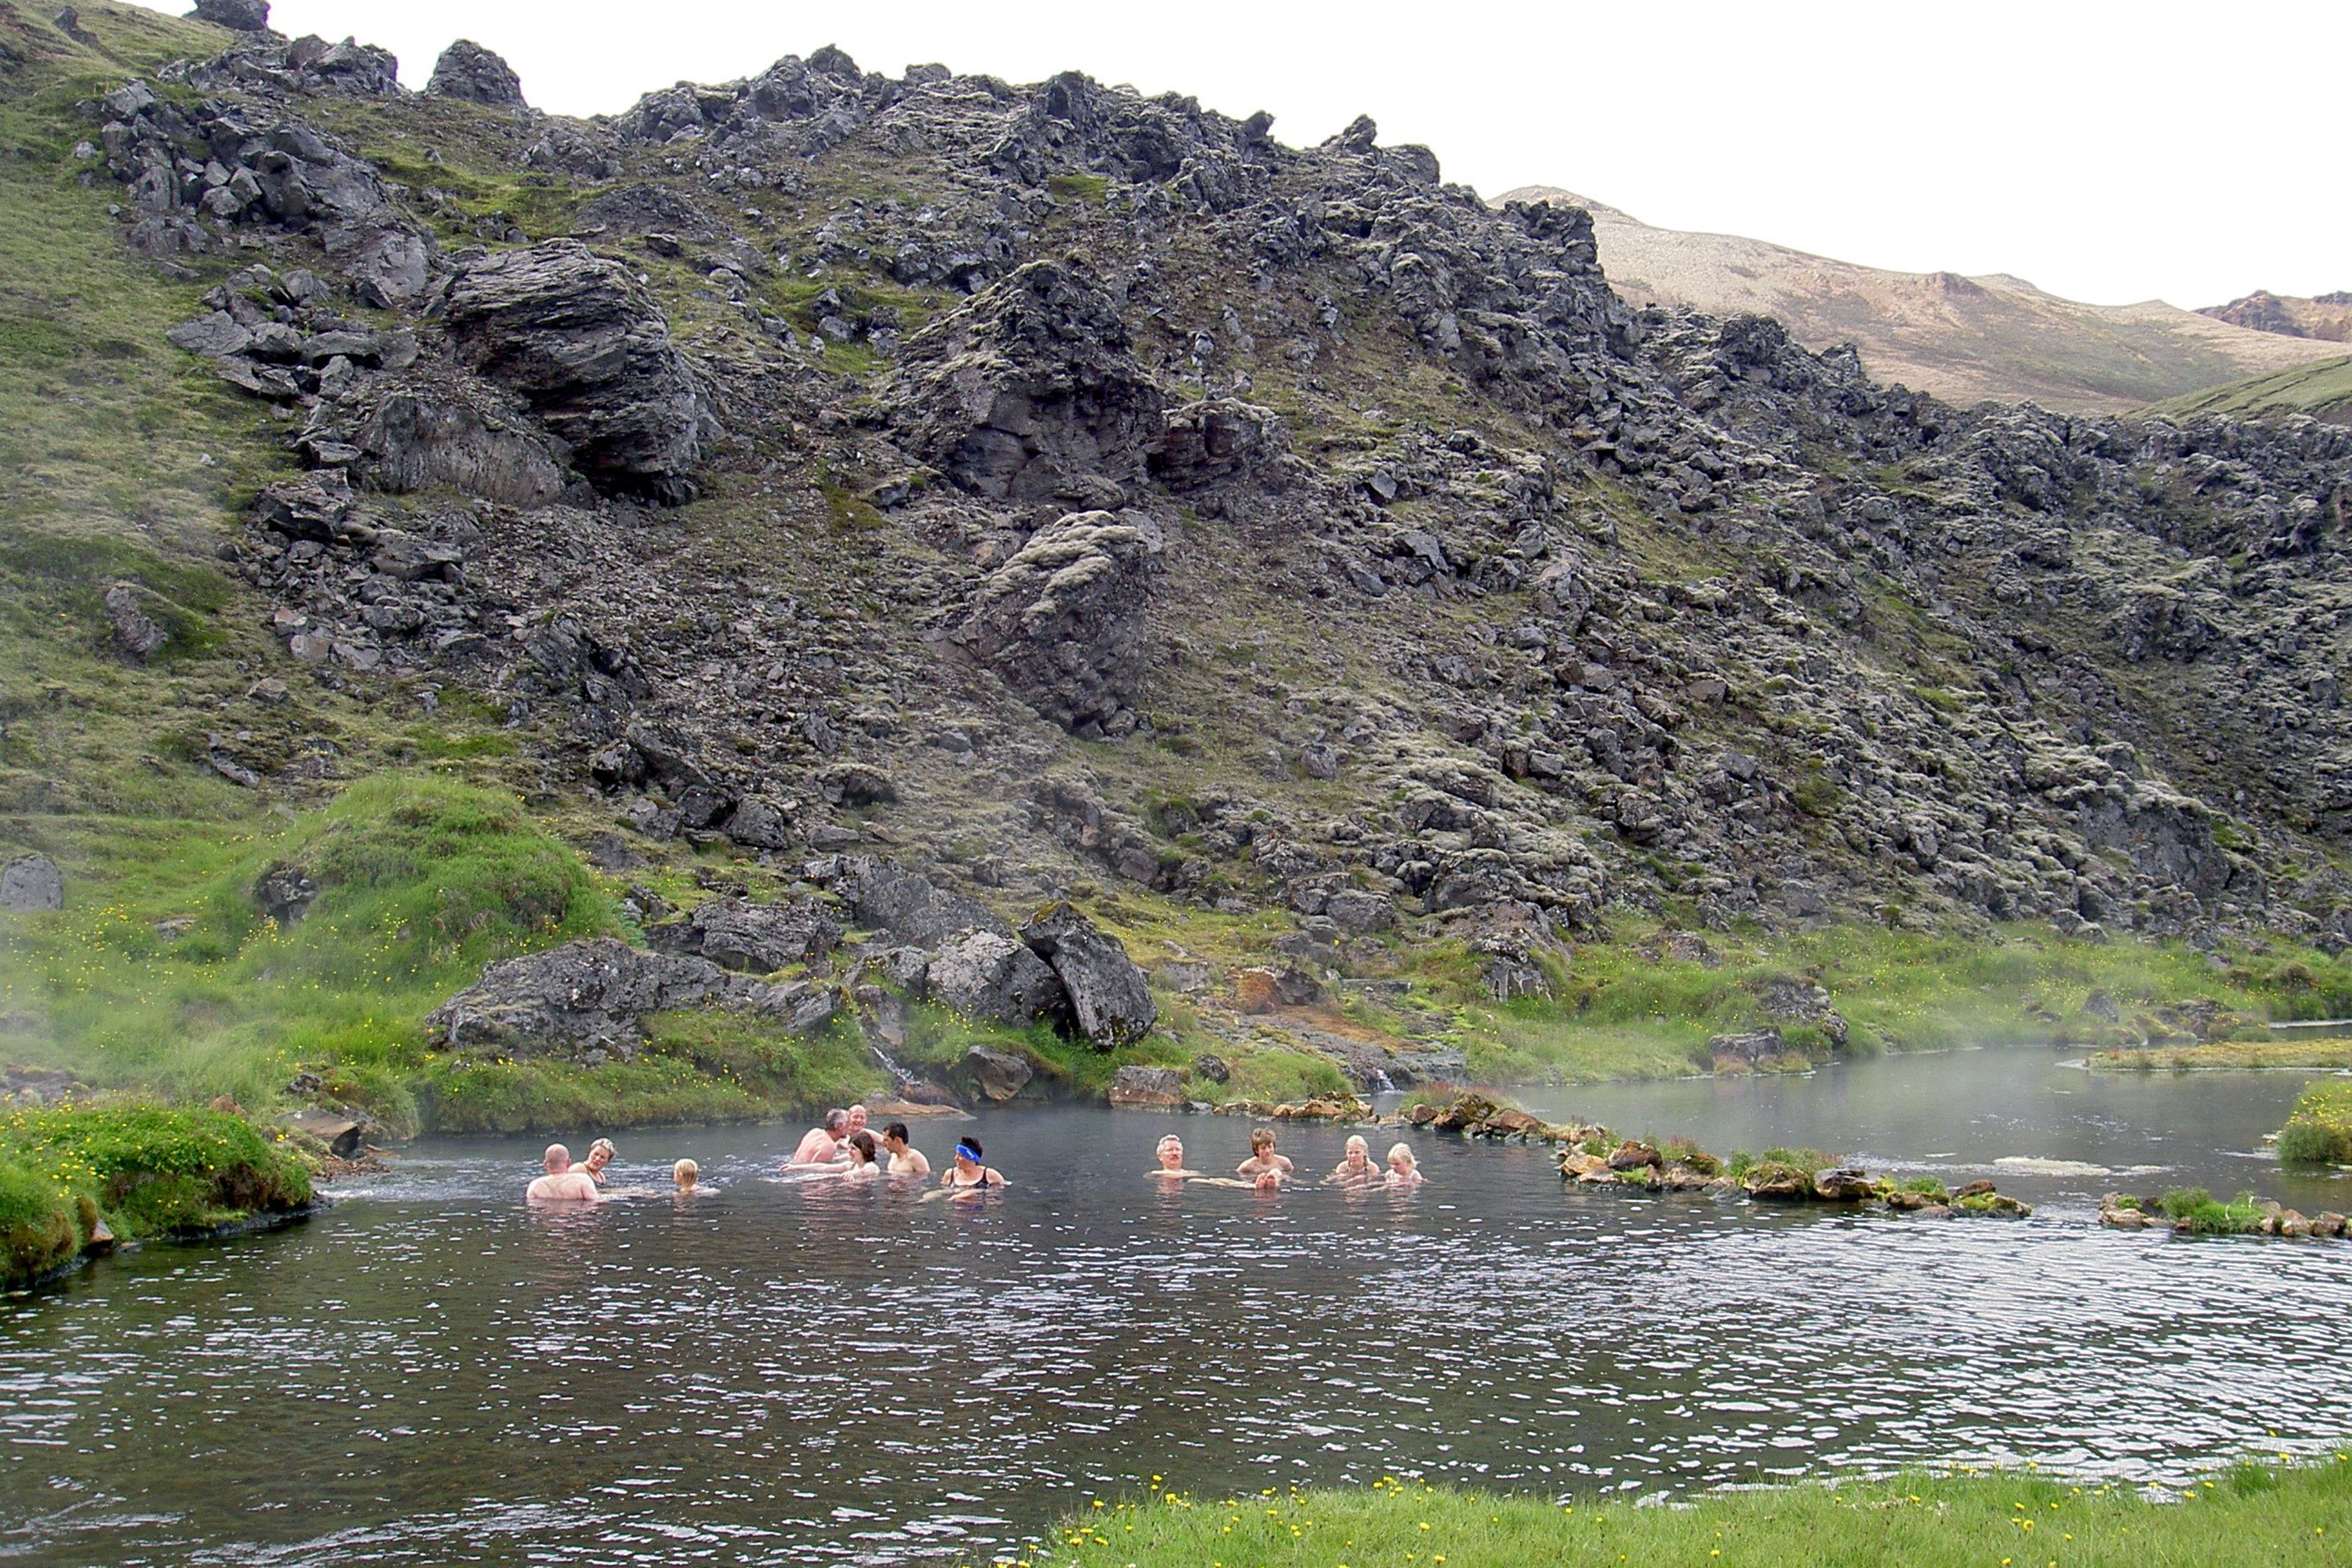 People wearing swimsuits in a hot spring in Iceland